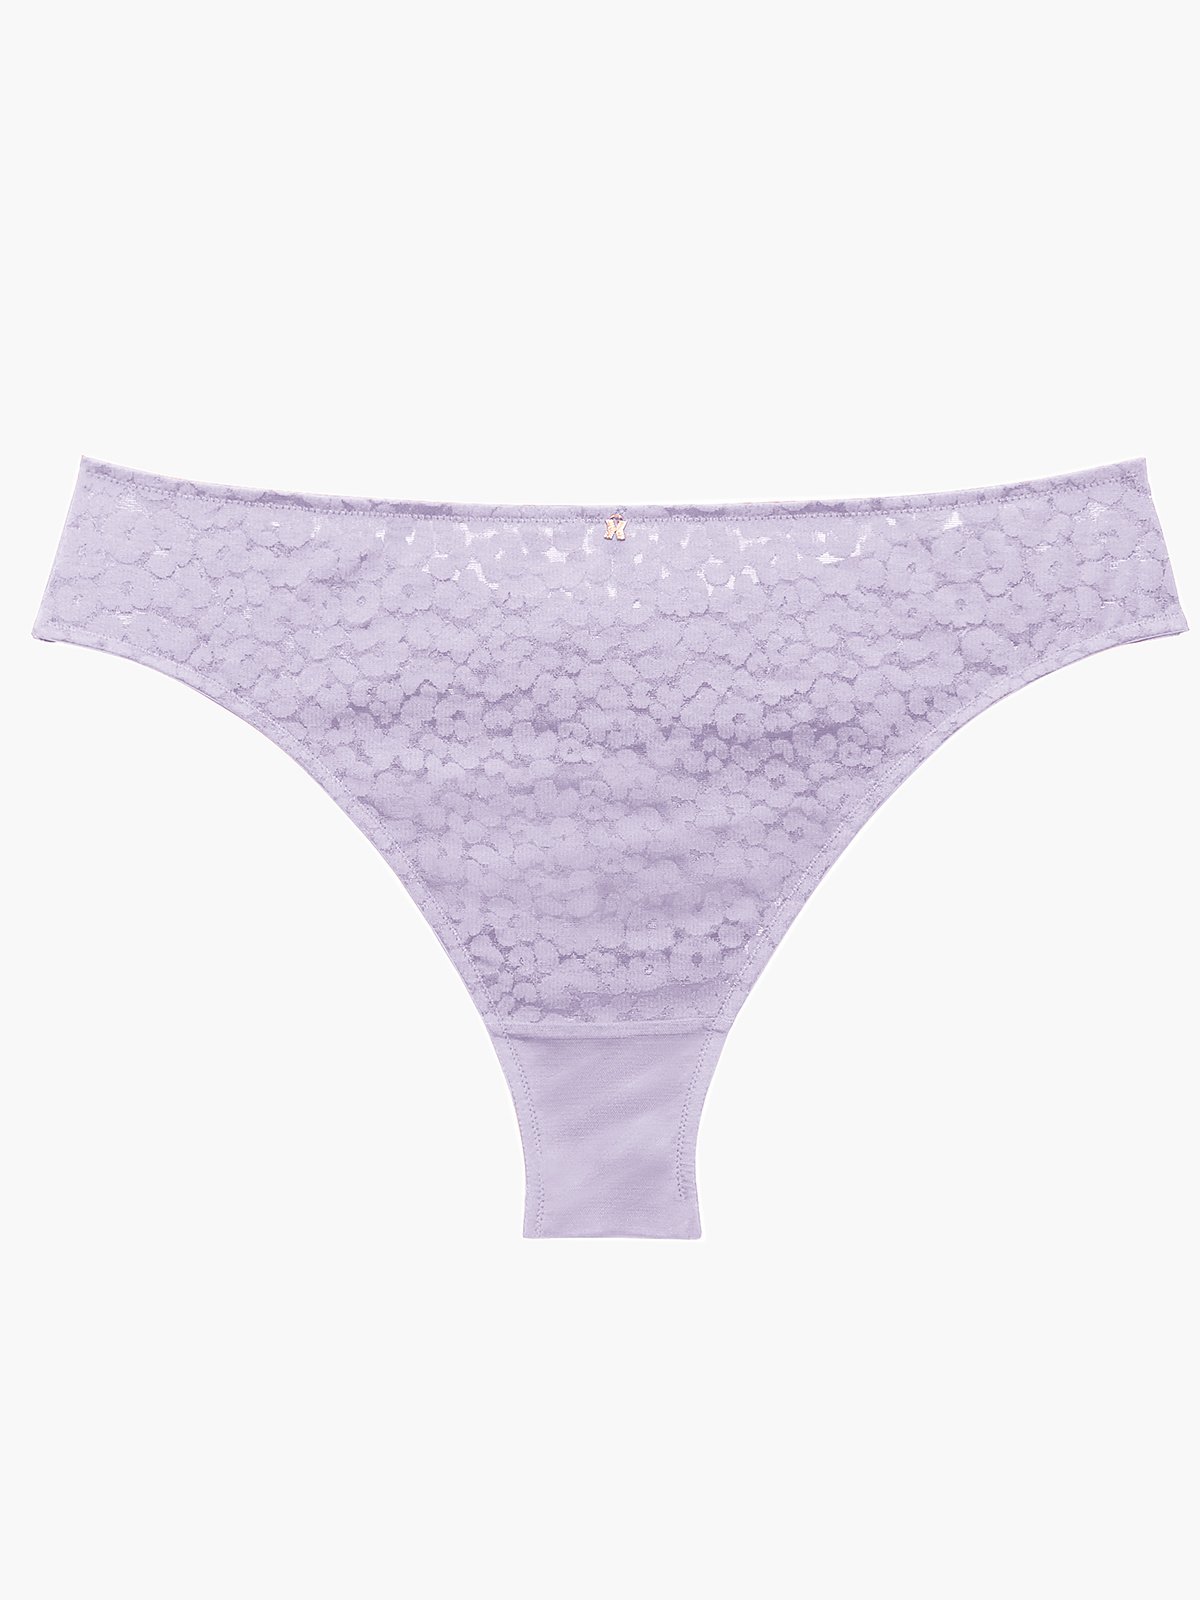 PrettySecrets on X: #SquadGoals - and these super cute #panties  #newarrivals #justin #panty #print    / X